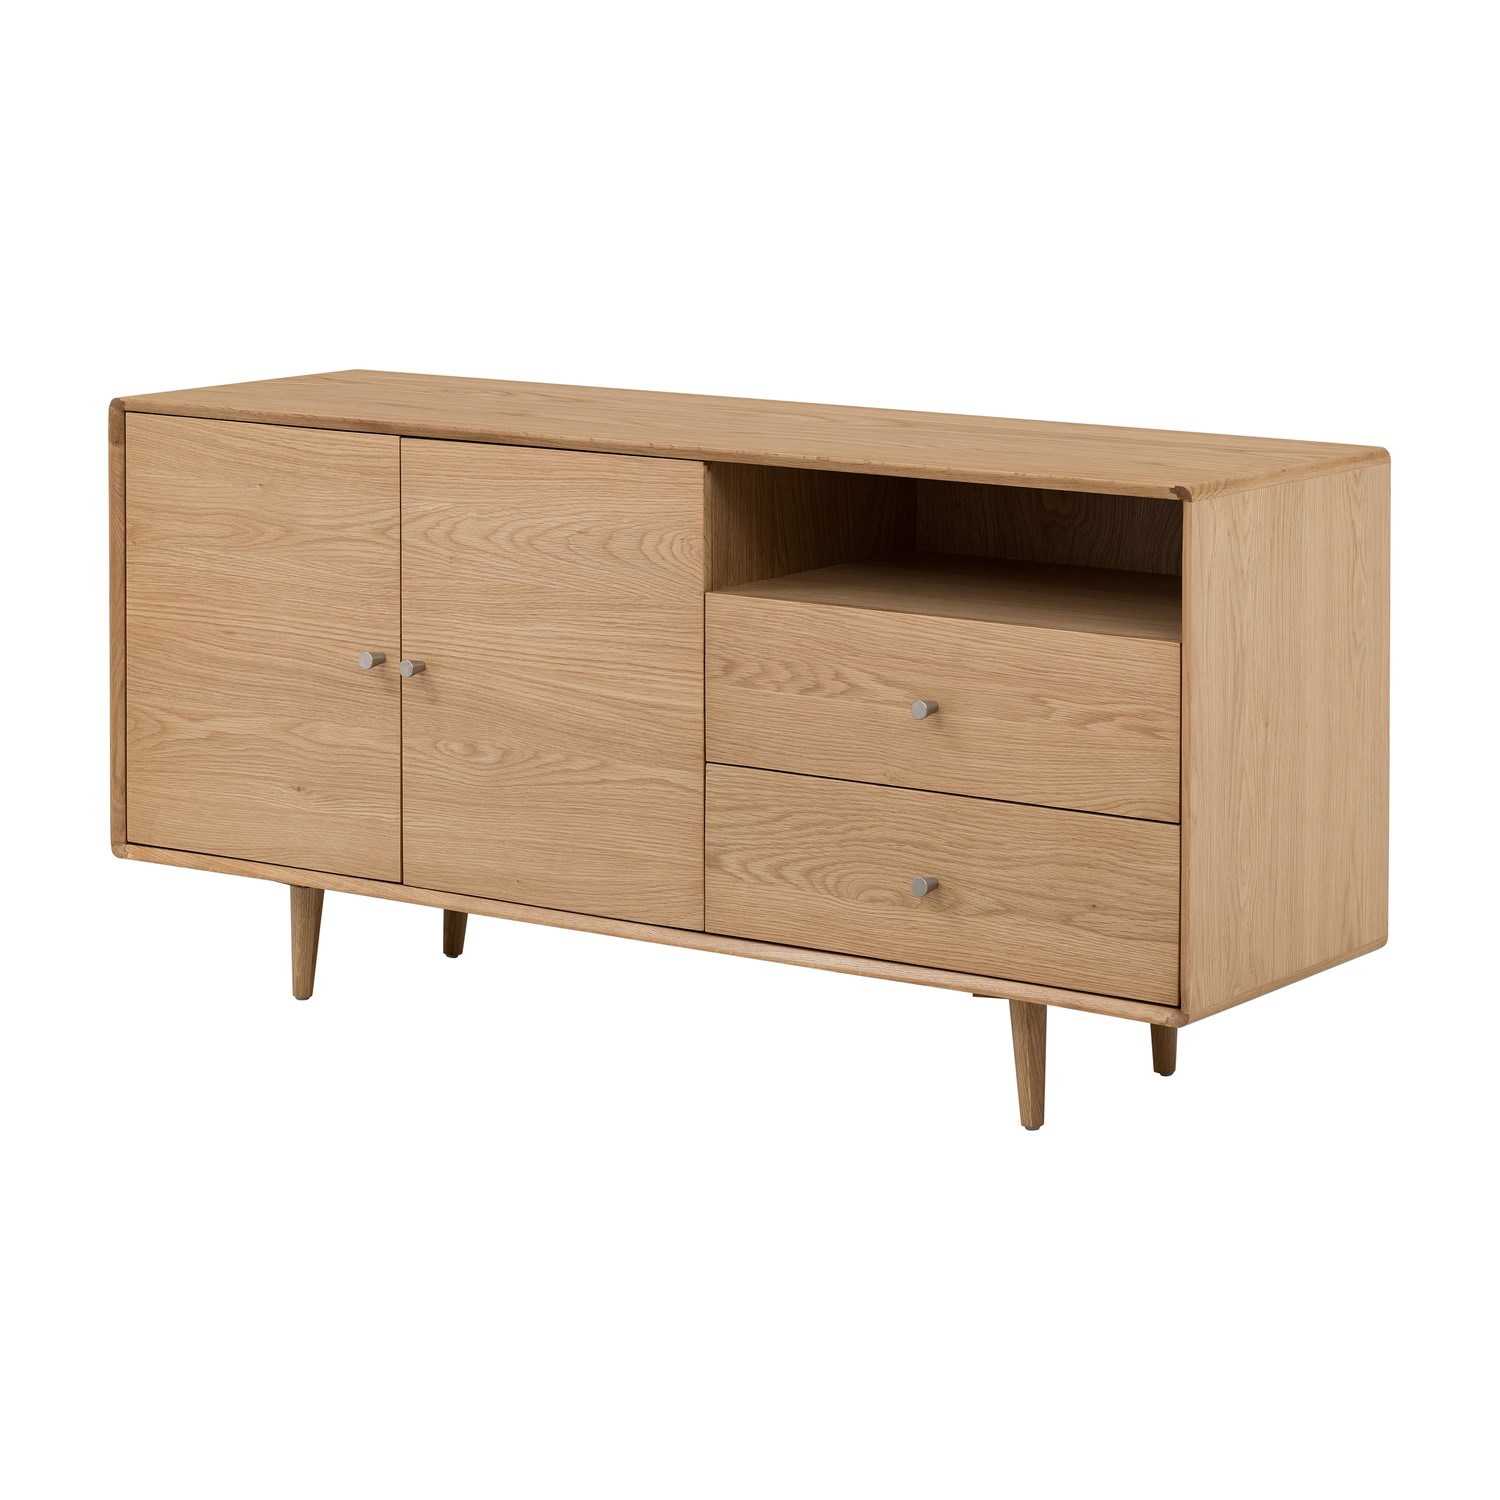 Read more about Large solid oak sideboard marny